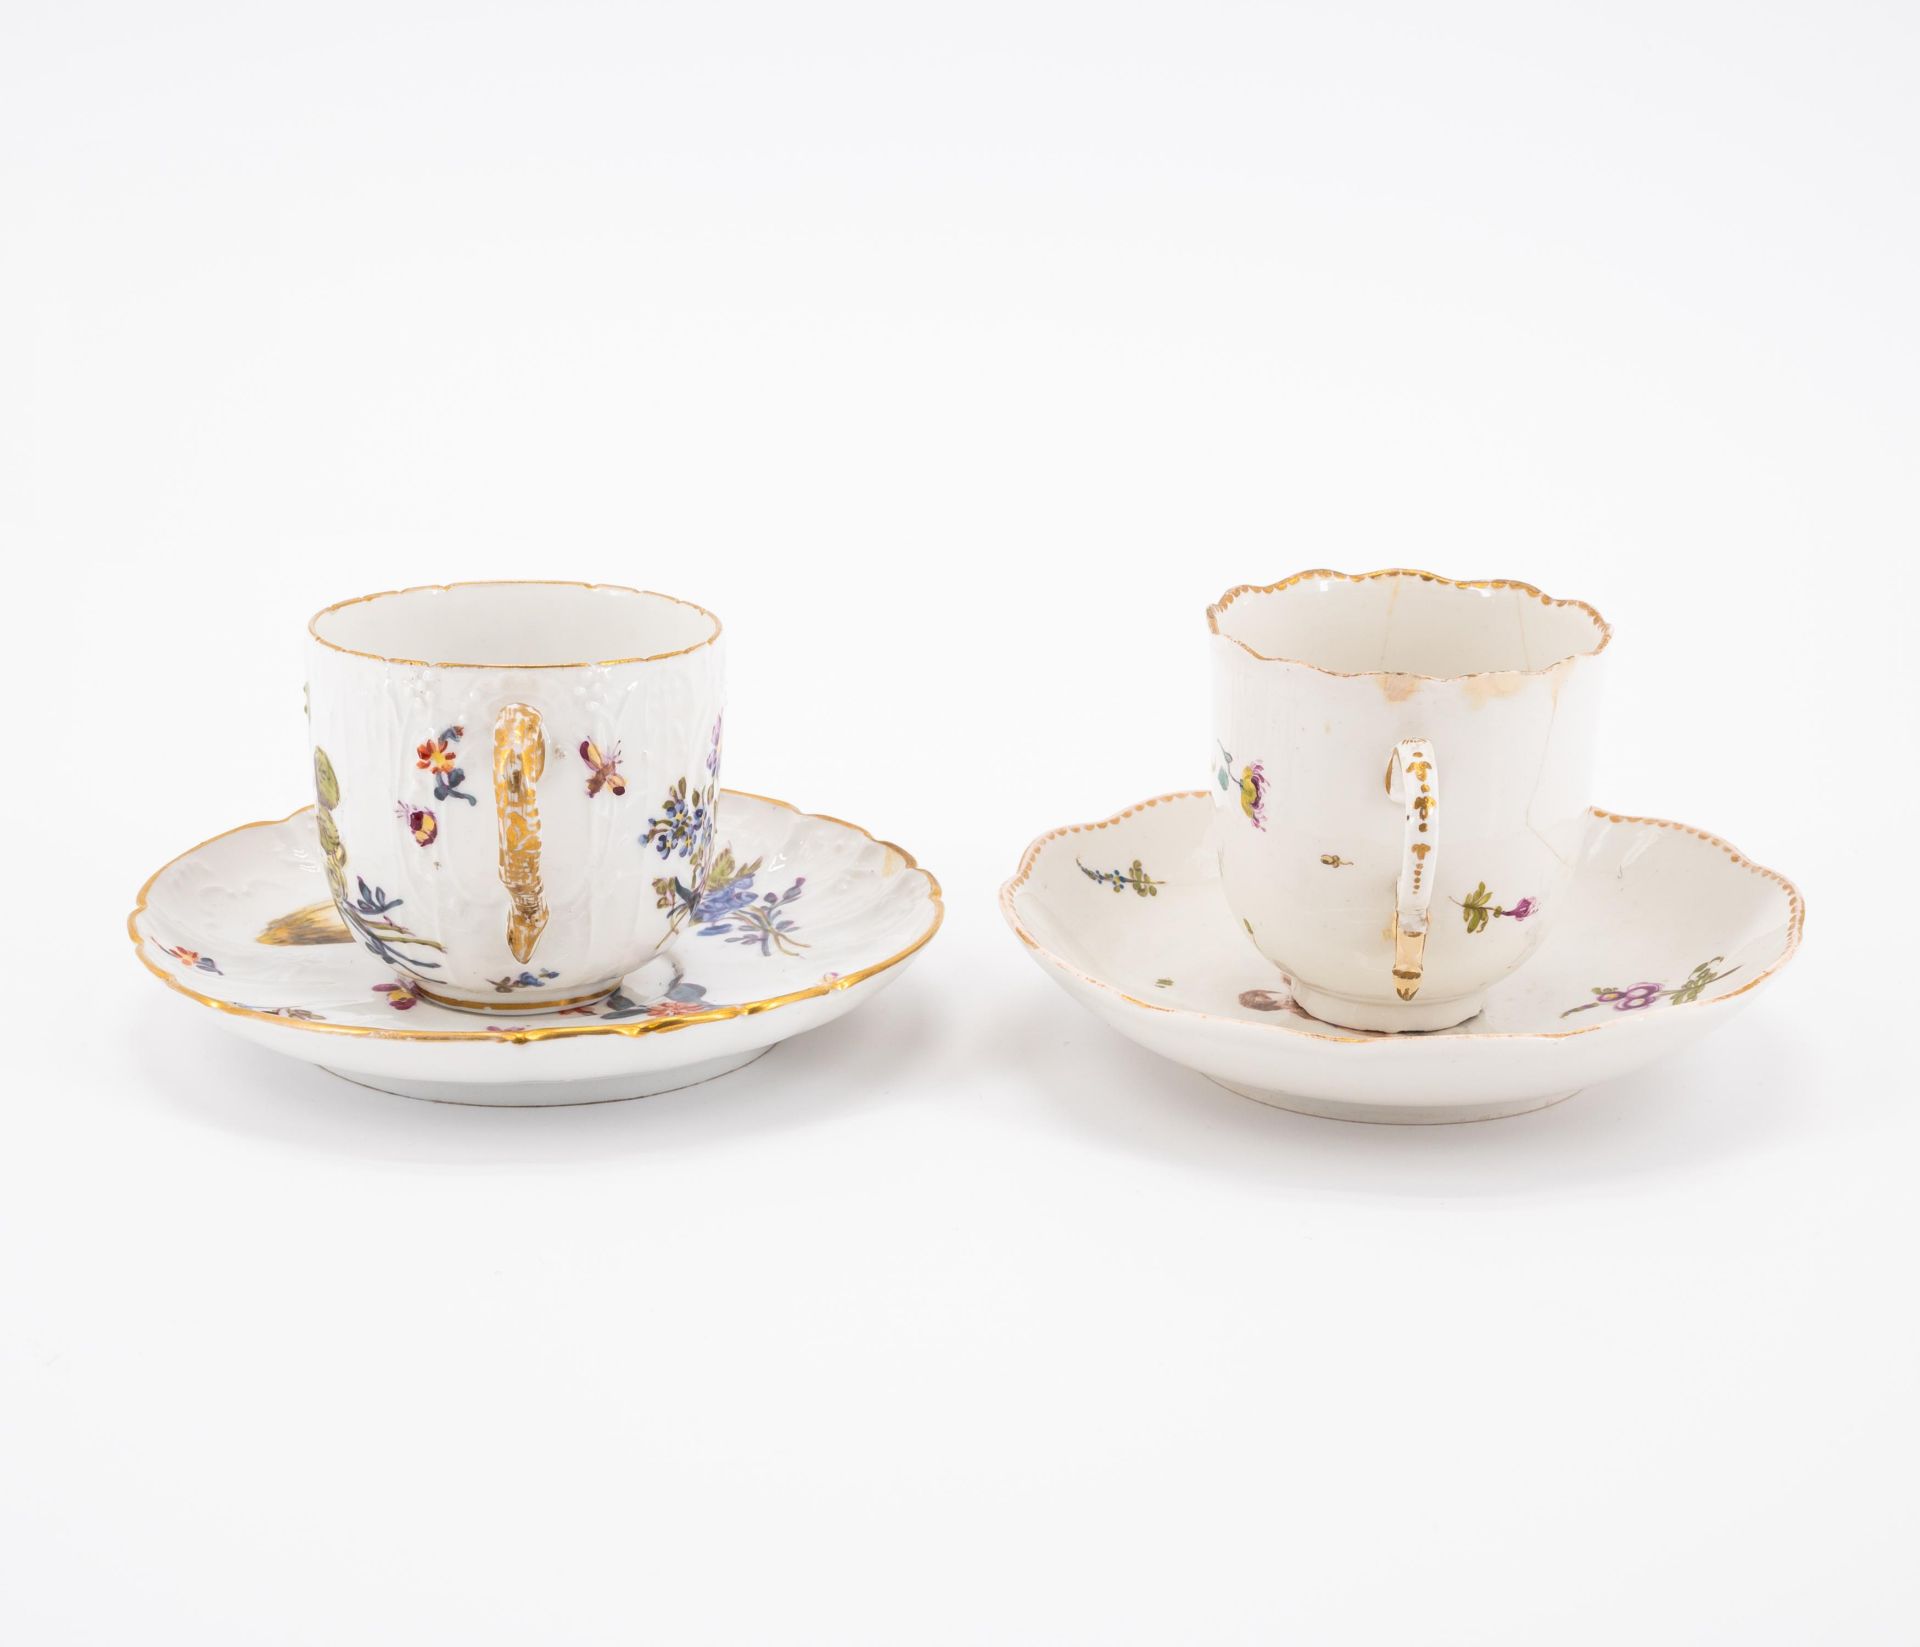 PORCELAIN SLOP BOWL, THREE CUPS AND SAUCERS WITH FIGURATIVE AND FLORAL DECOR - Image 2 of 22